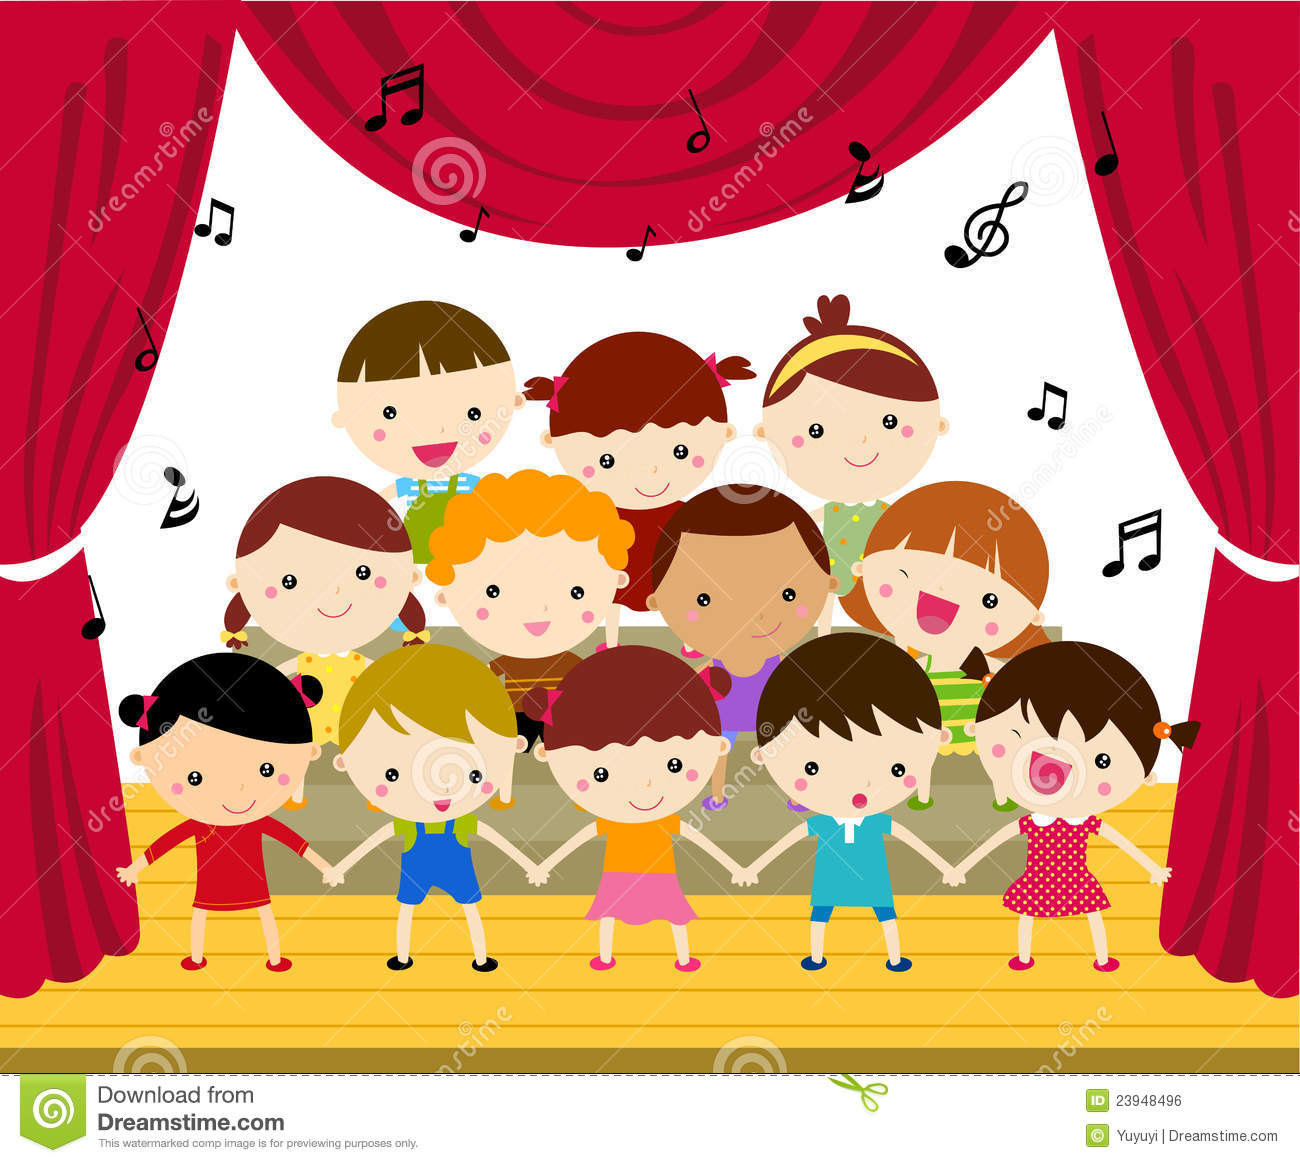 Children S Choir Performing On Stage Royalty Free Stock Image